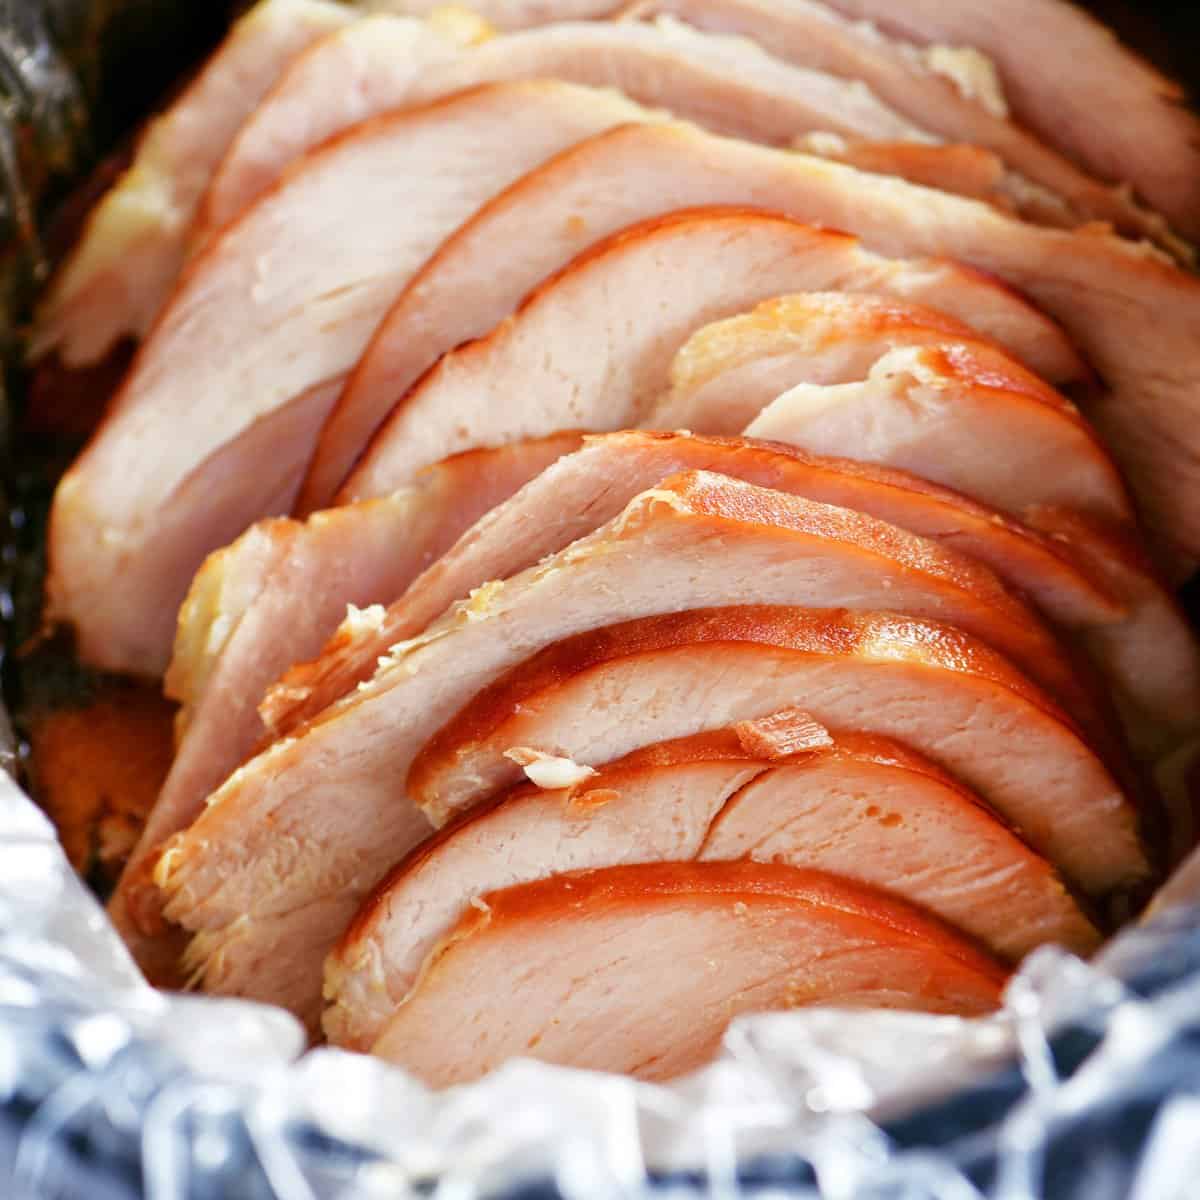 What do you do if your ham or turkey is too big for your crockpot?